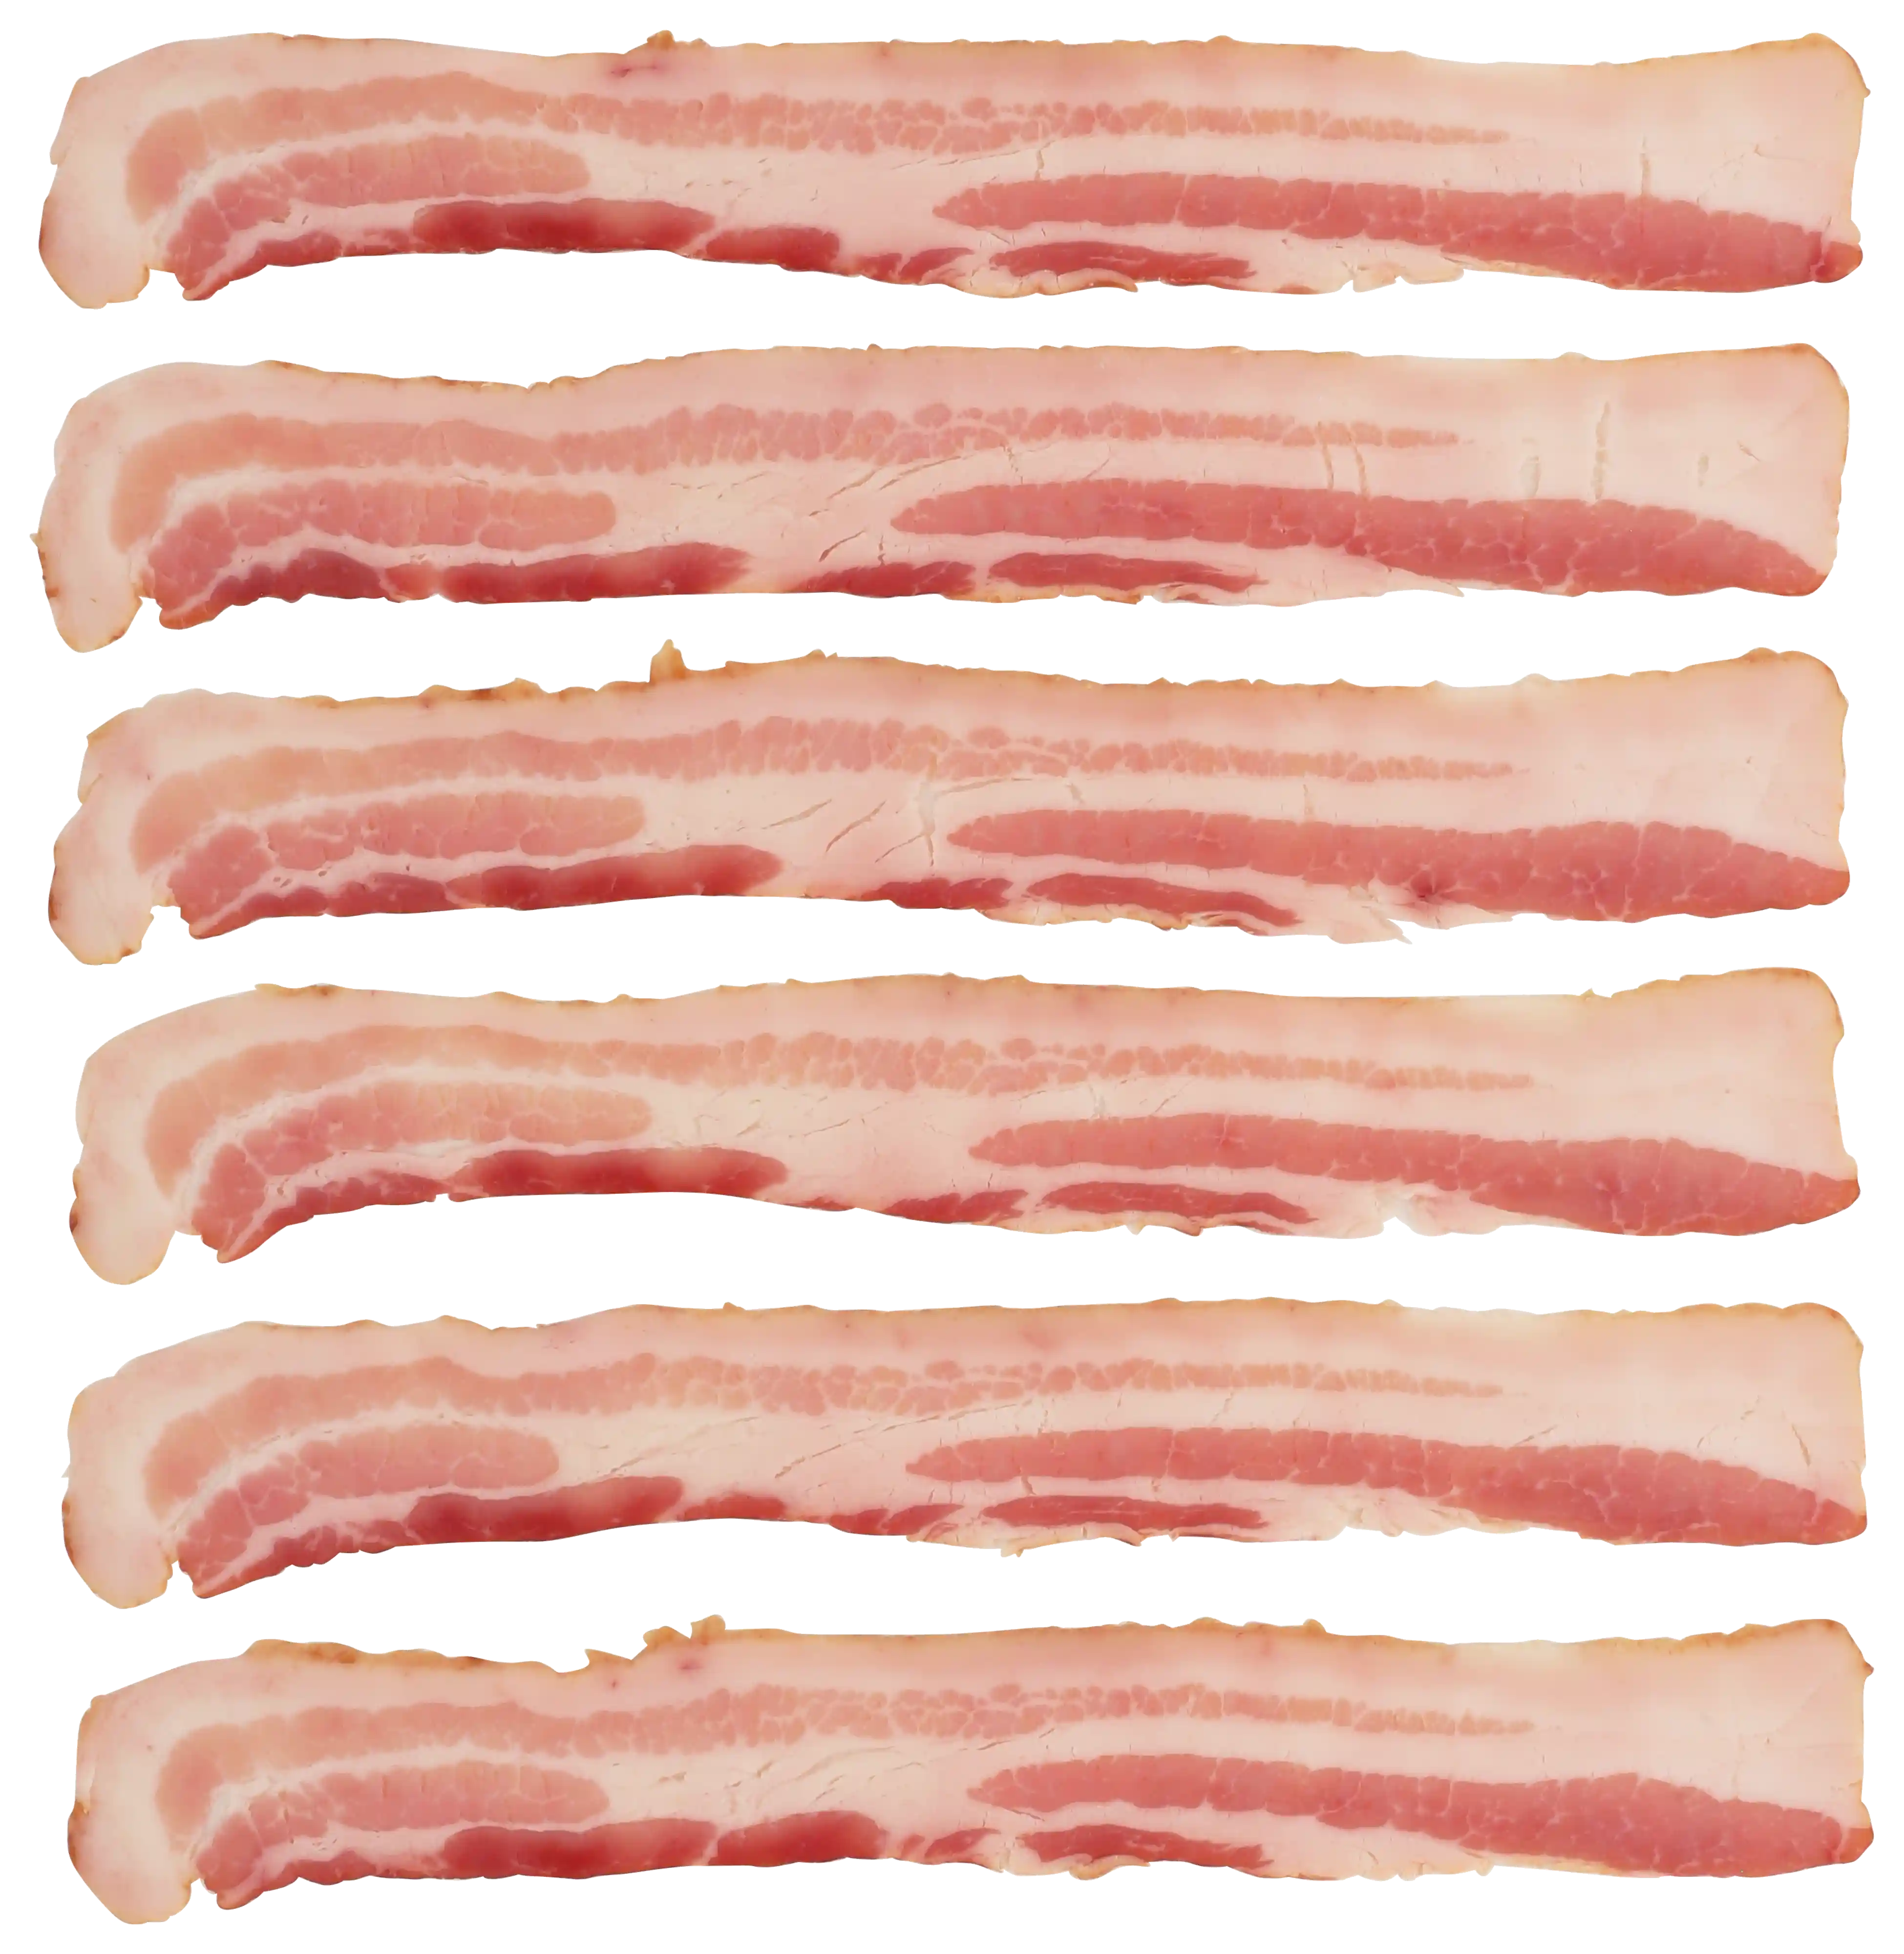 Wright® Brand Naturally Hickory Smoked Thin Sliced Bacon, Bulk, 15 Lbs, 18-22 Slices per Pound, Gas Flushed_image_21